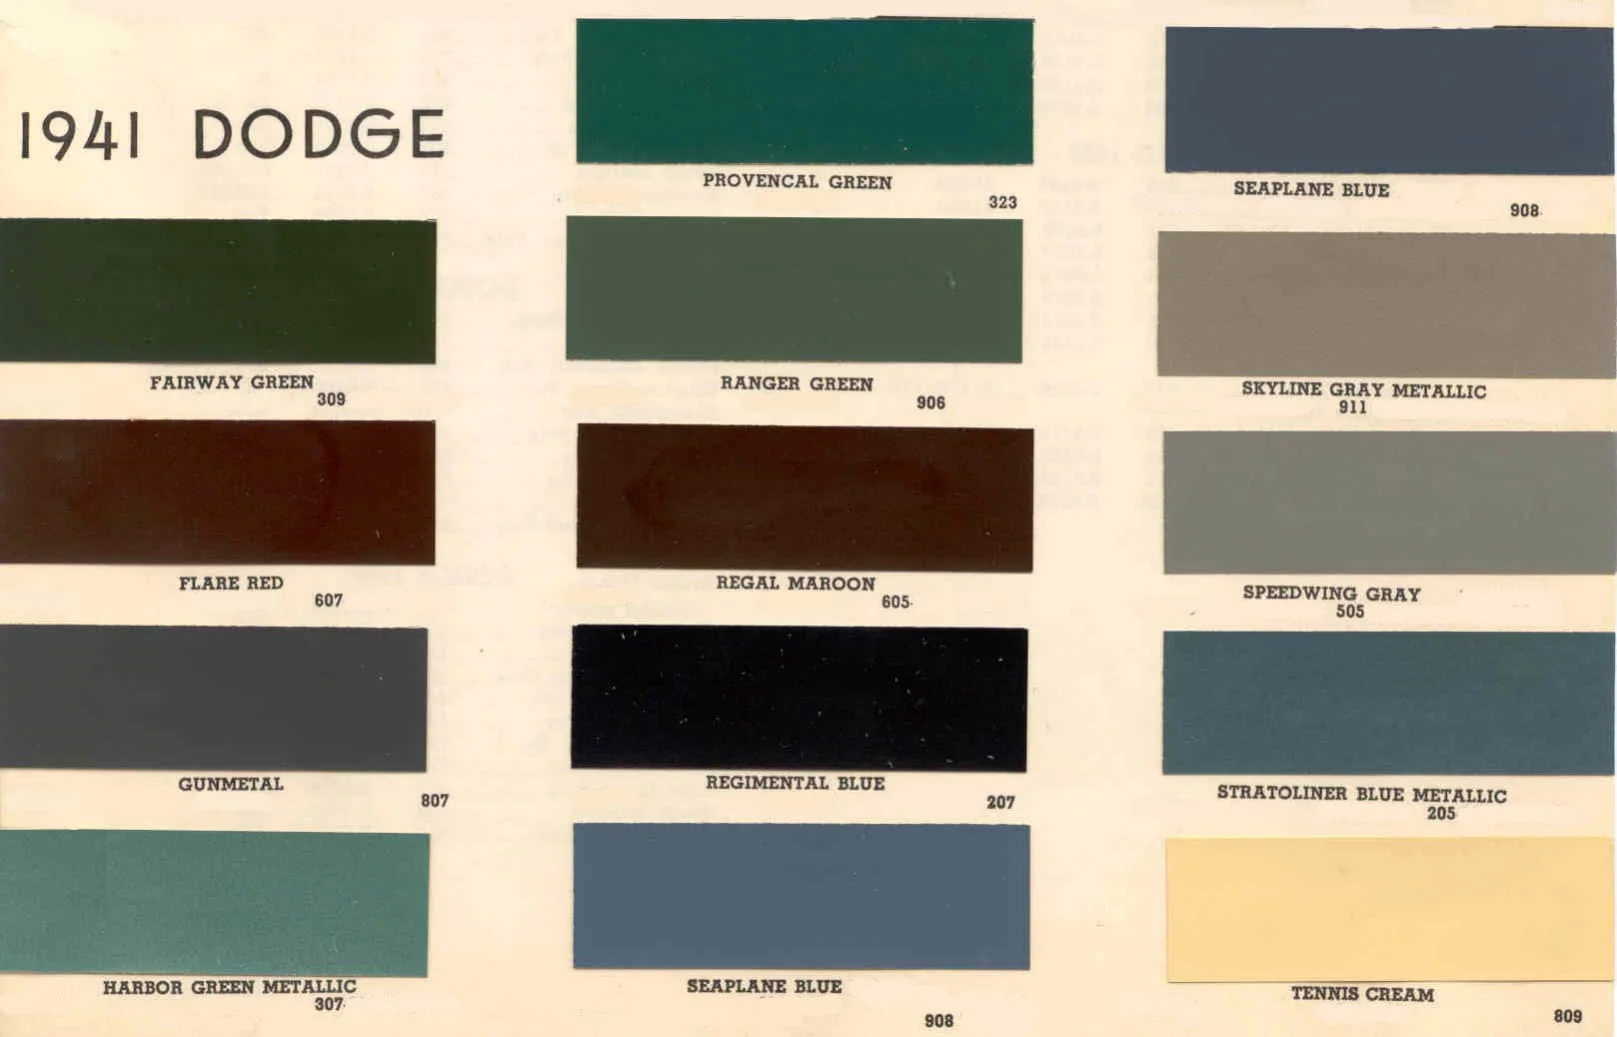 Summary Of Colors used on all Dodge Vehicles in 1941